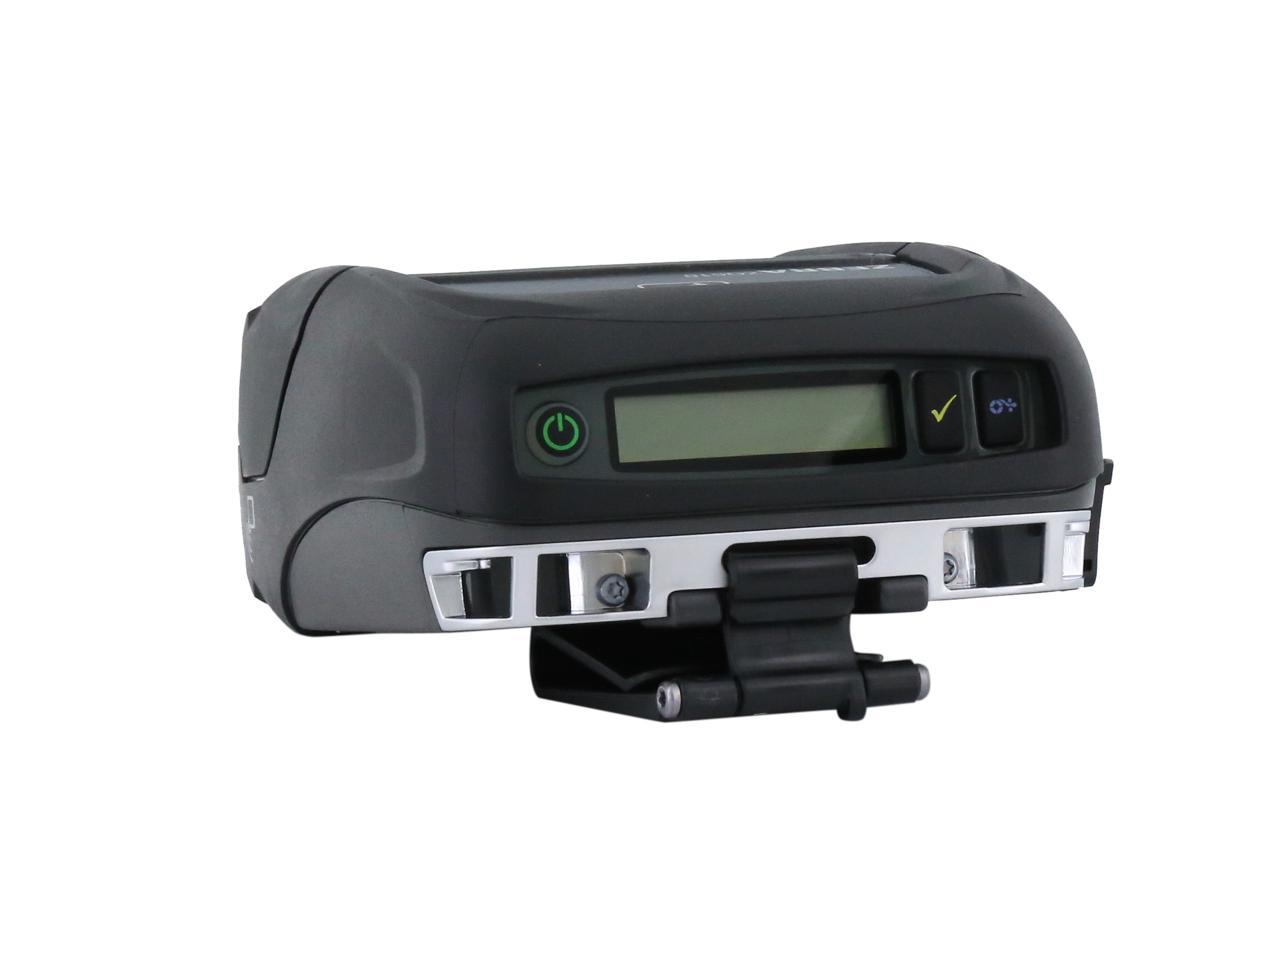 Zebra Zq510 3 Mobile Direct Thermal Receipt And Label Printer 203 Dpi Bluetooth 40 Linered 5760